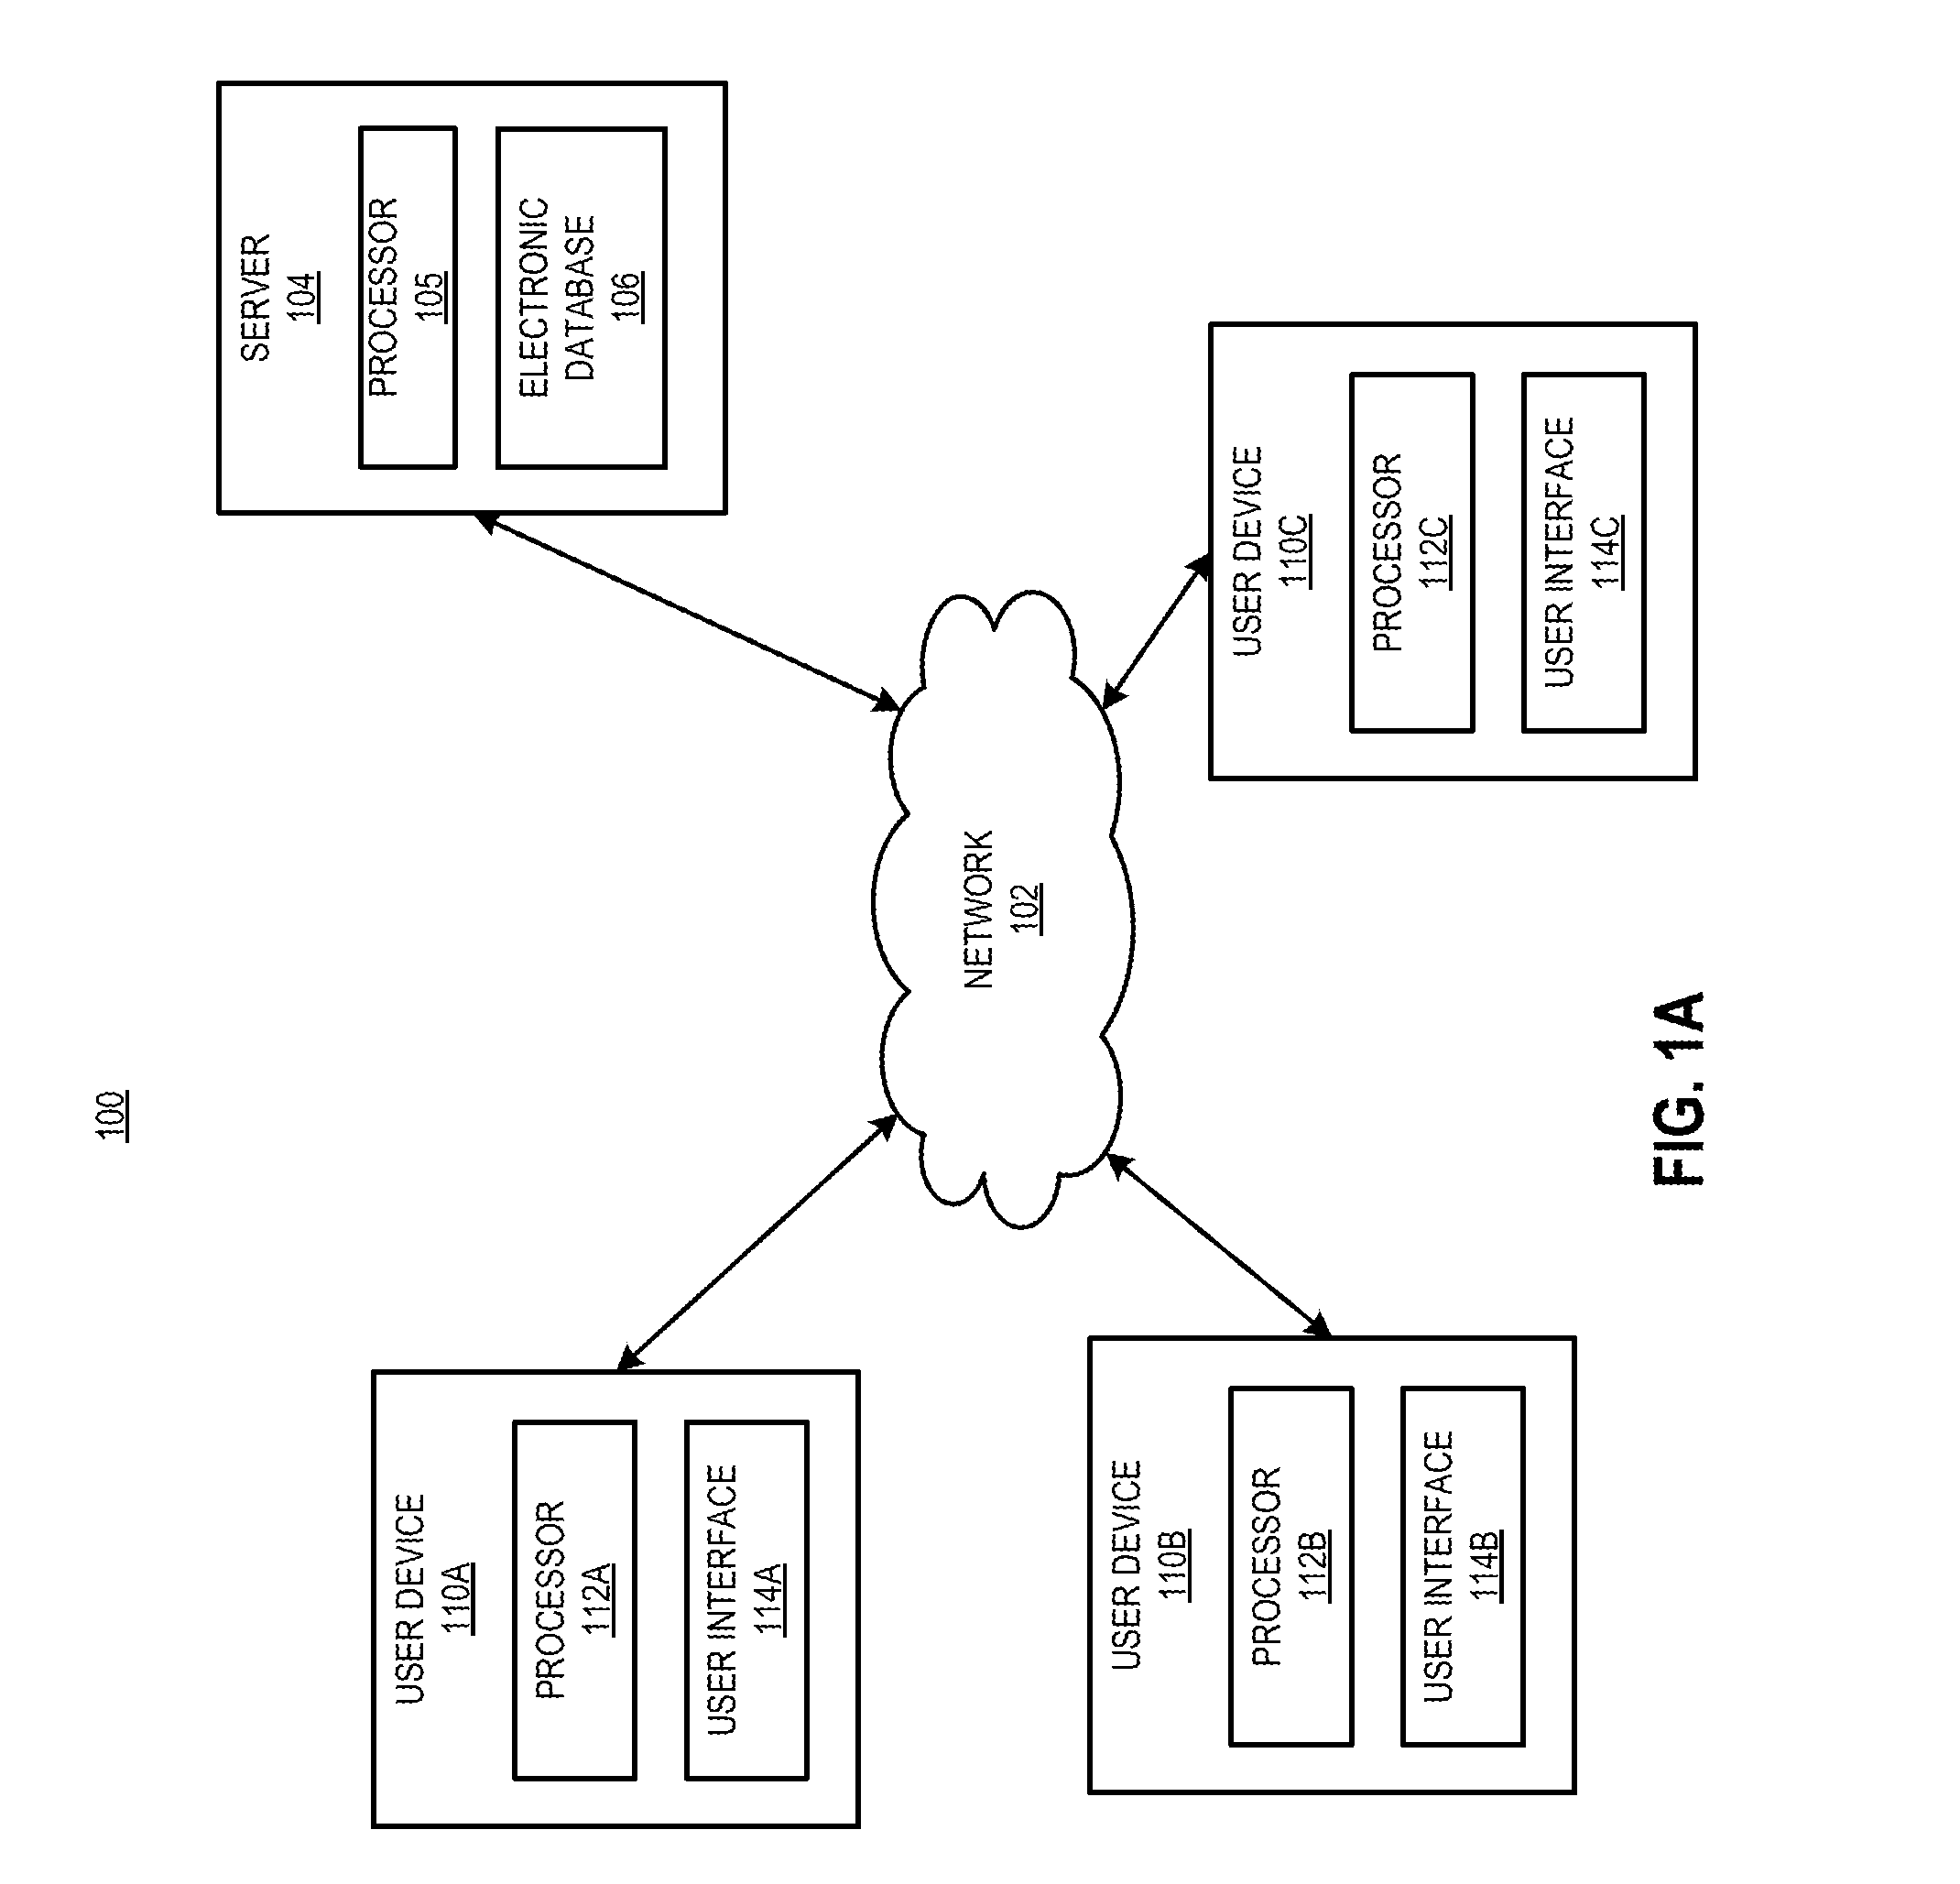 Methods of distributing complement-inhibiting drugs to patients receiving a complement inhibitor